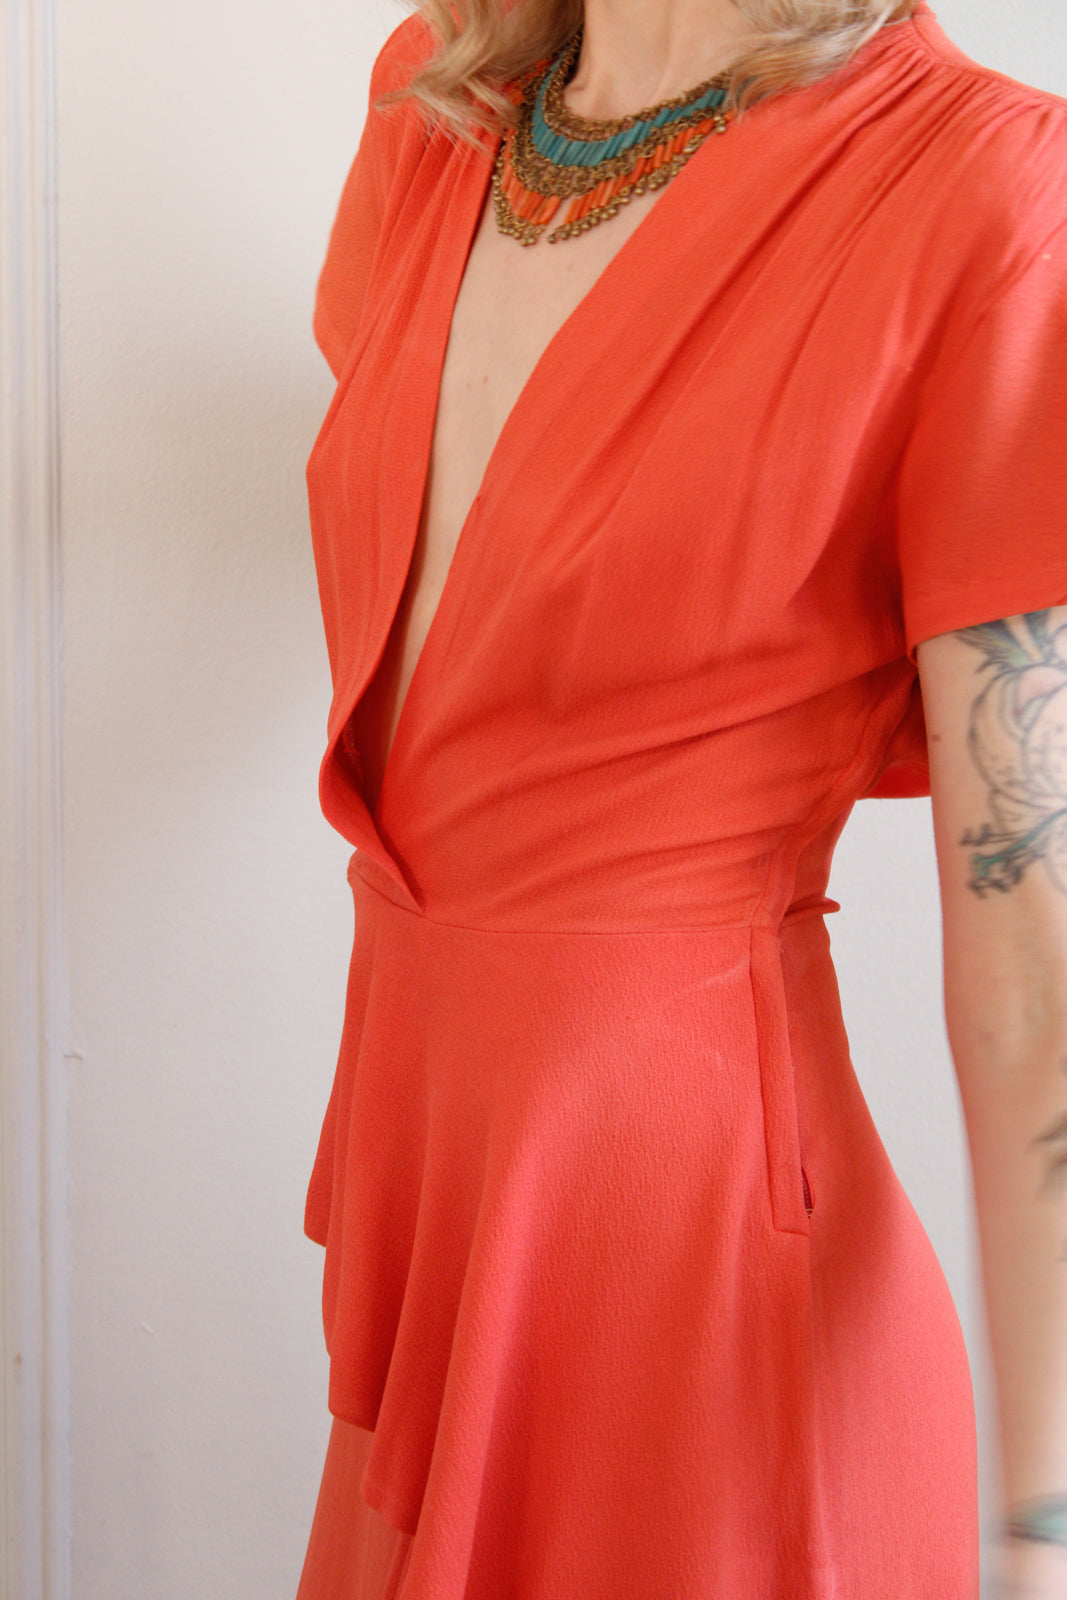 1940s Coral Rayon Crepe Draped Gown - Medium